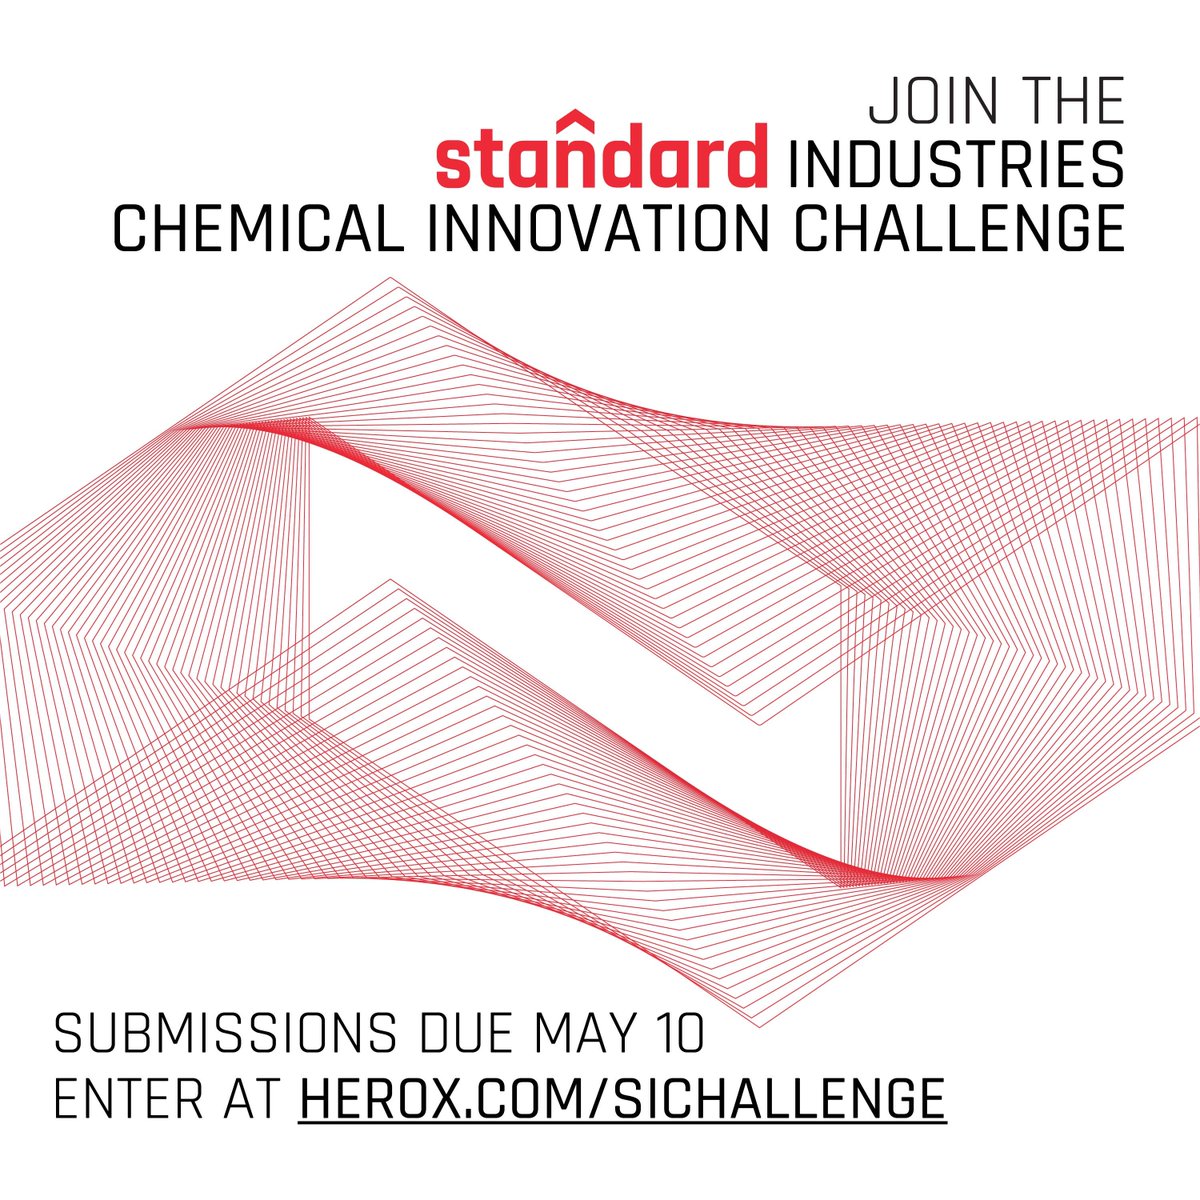 Standard Industries and W.R. Grace are inviting innovators from across the globe to develop a machine-based platform that can help scientists effectively develop organic molecules at scale. Join the challenge and submit your research for a chance to win! hubs.ly/Q02tXwMM0